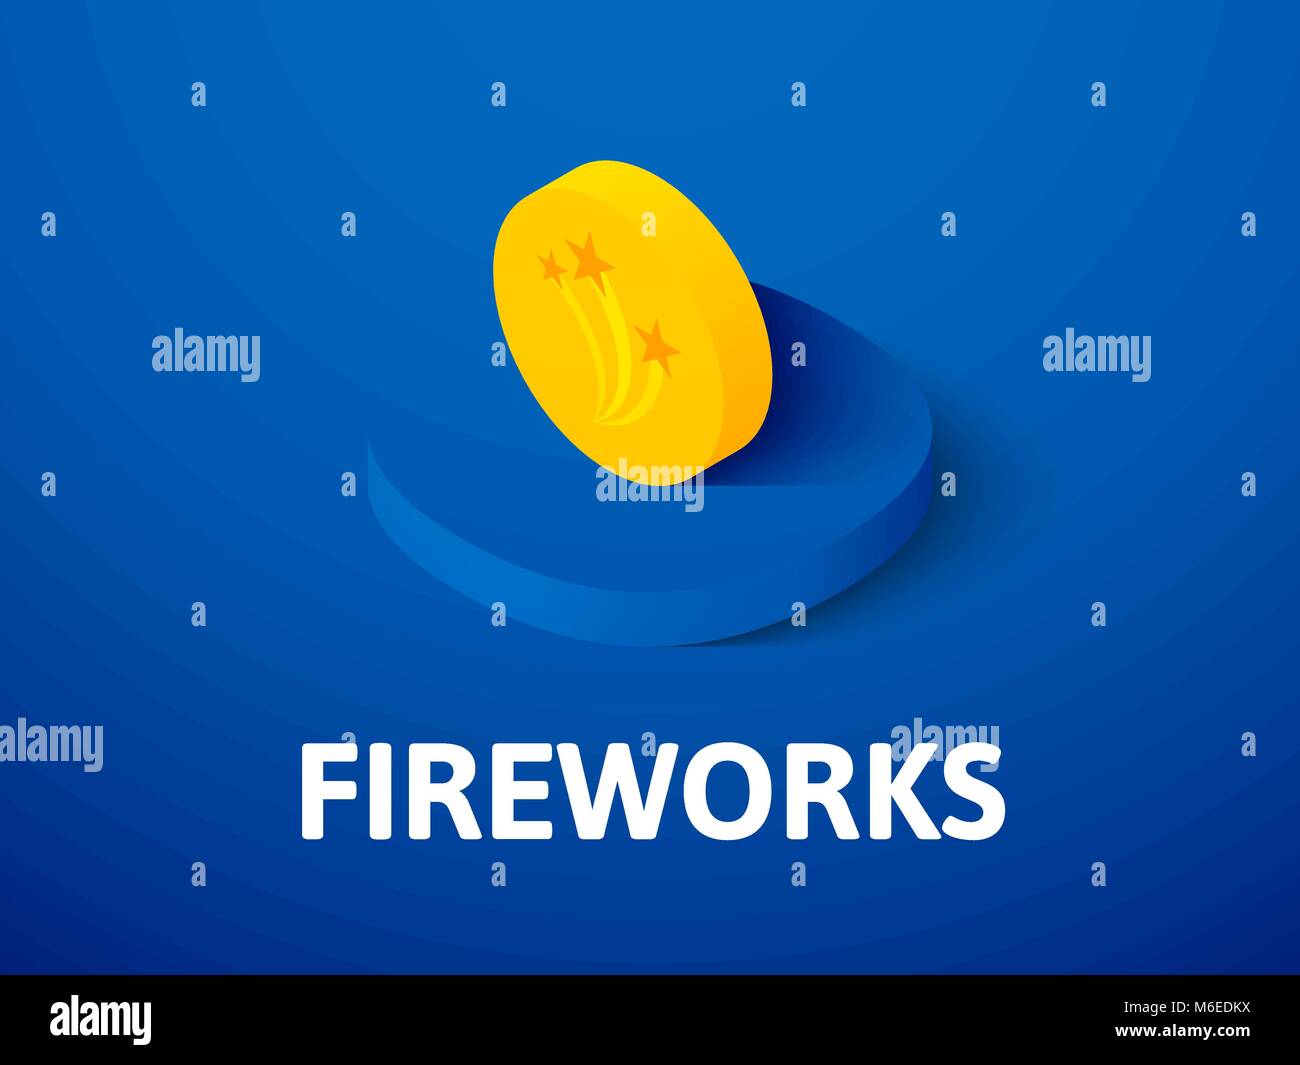 Fireworks isometric icon, isolated on color background Stock Vector